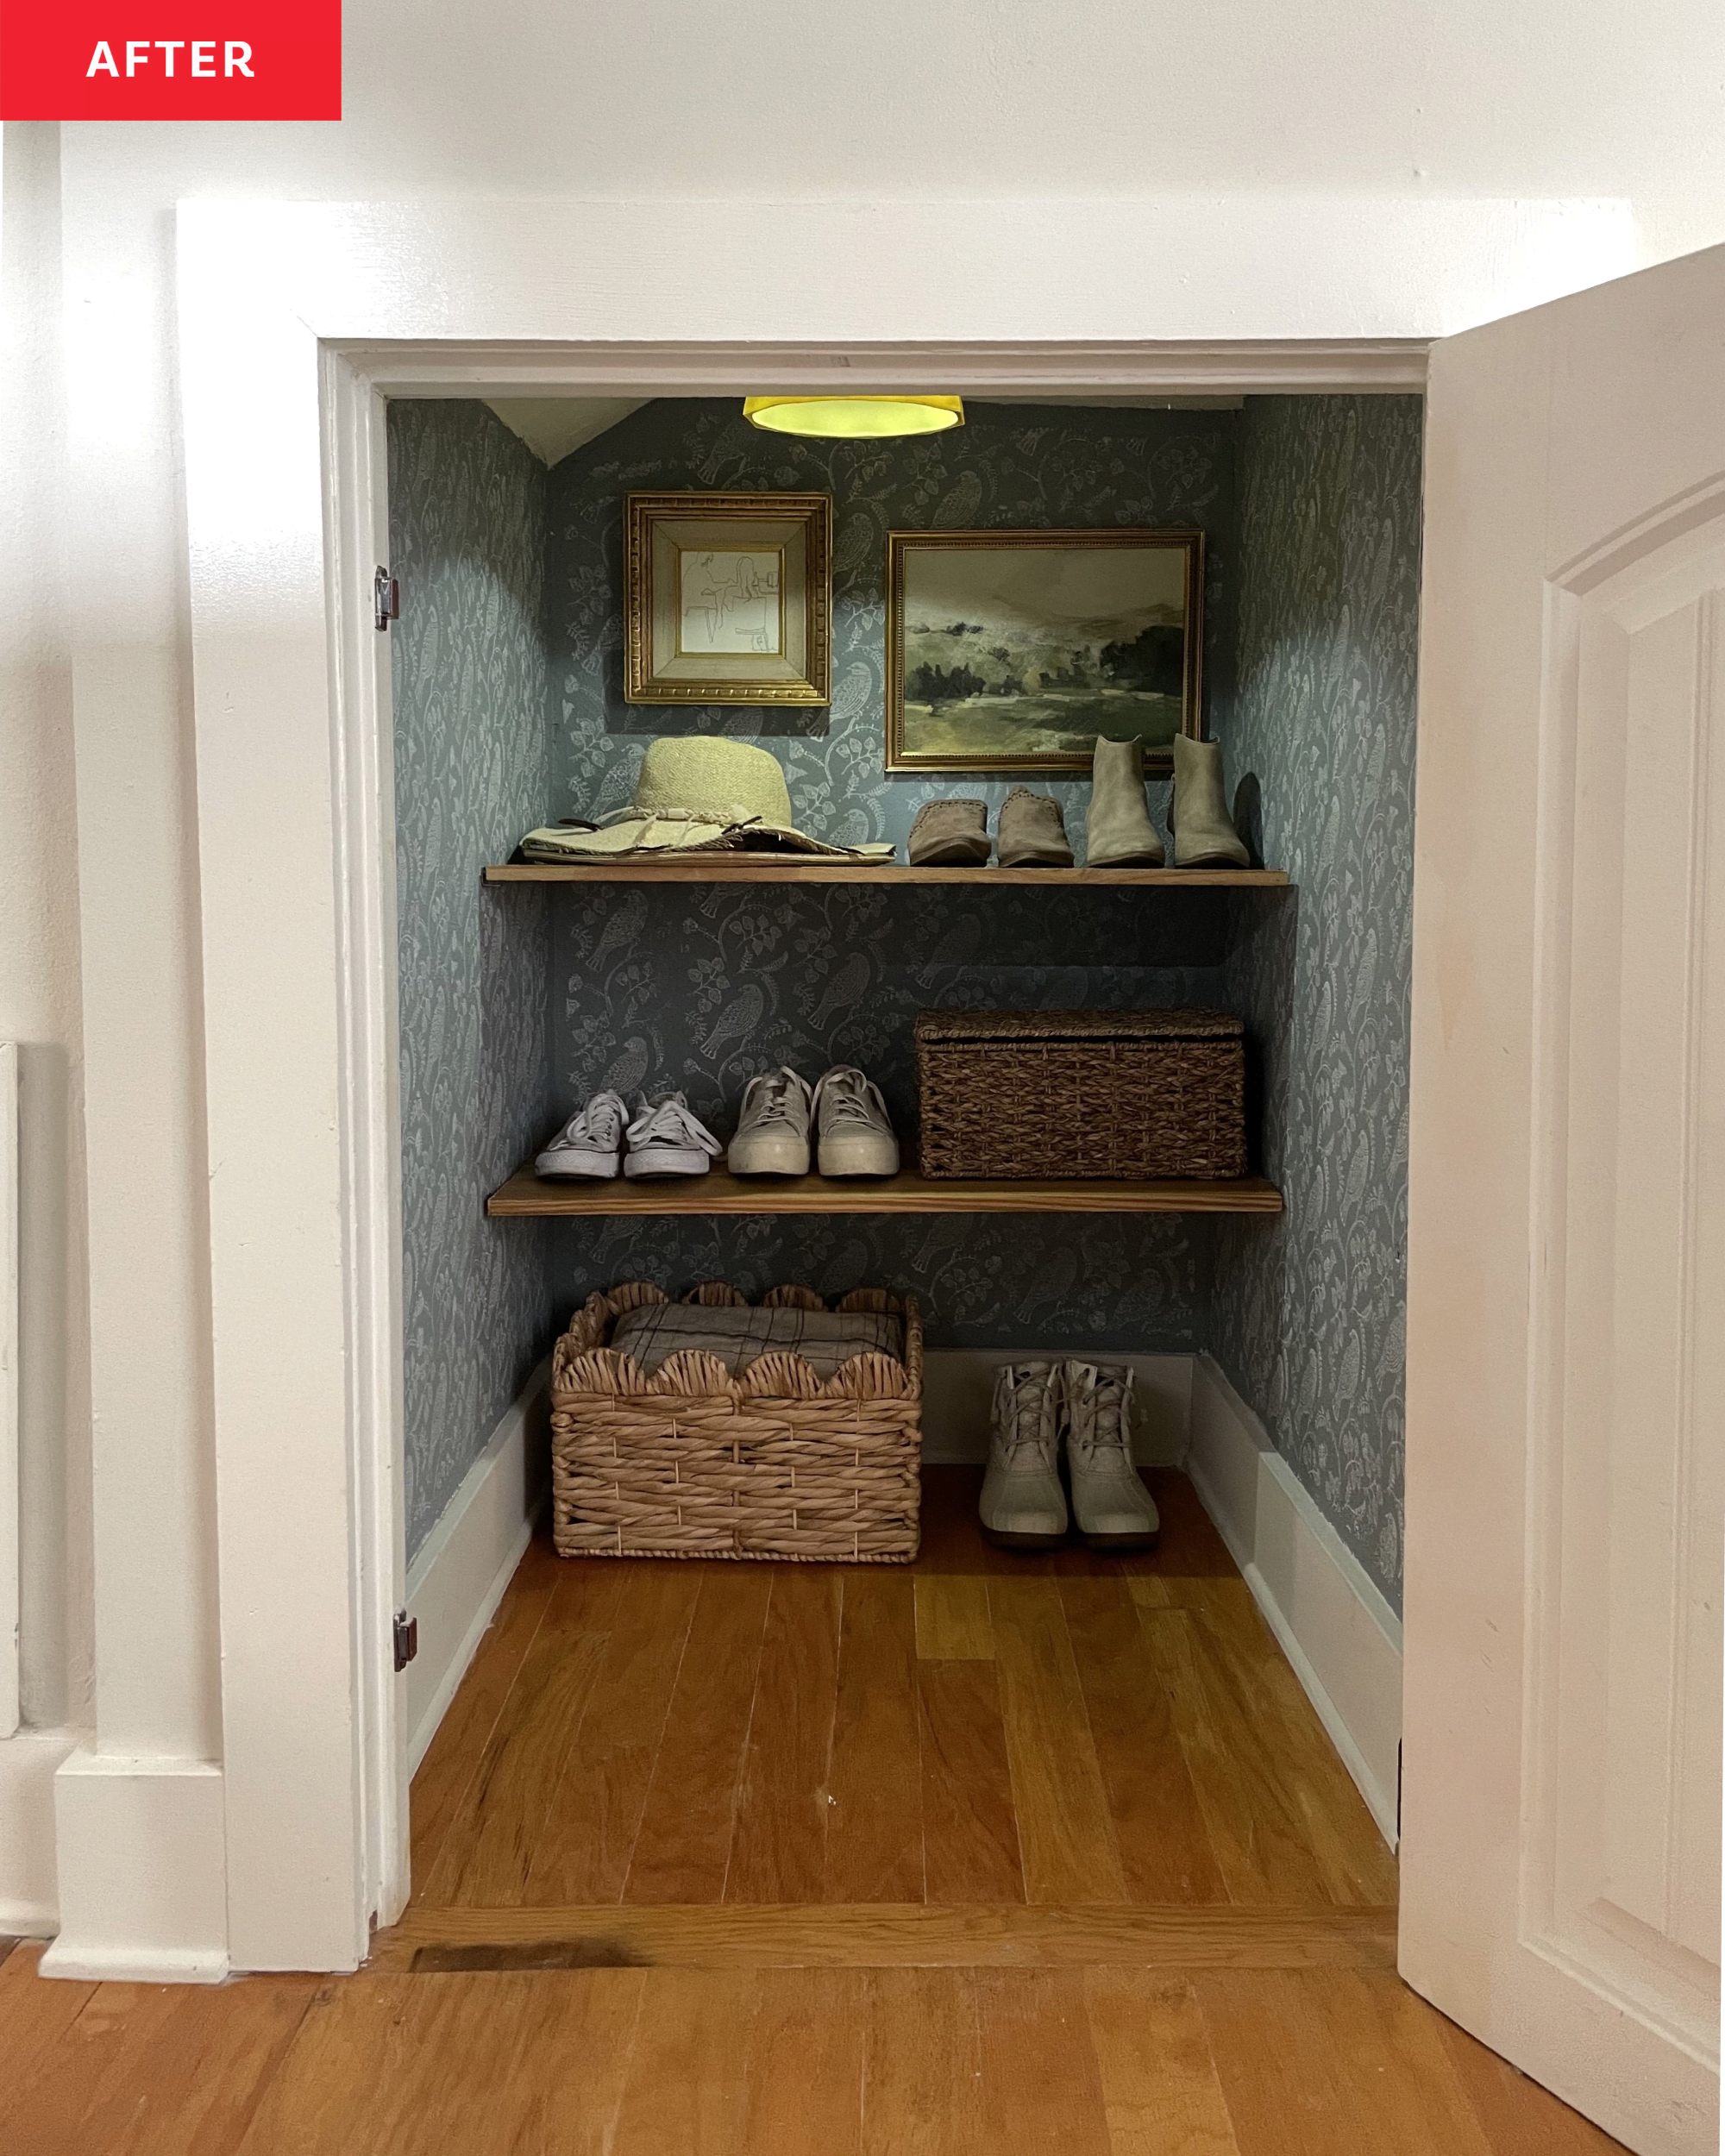 Our Front Entry Way Closet Makeover - Kay's Place